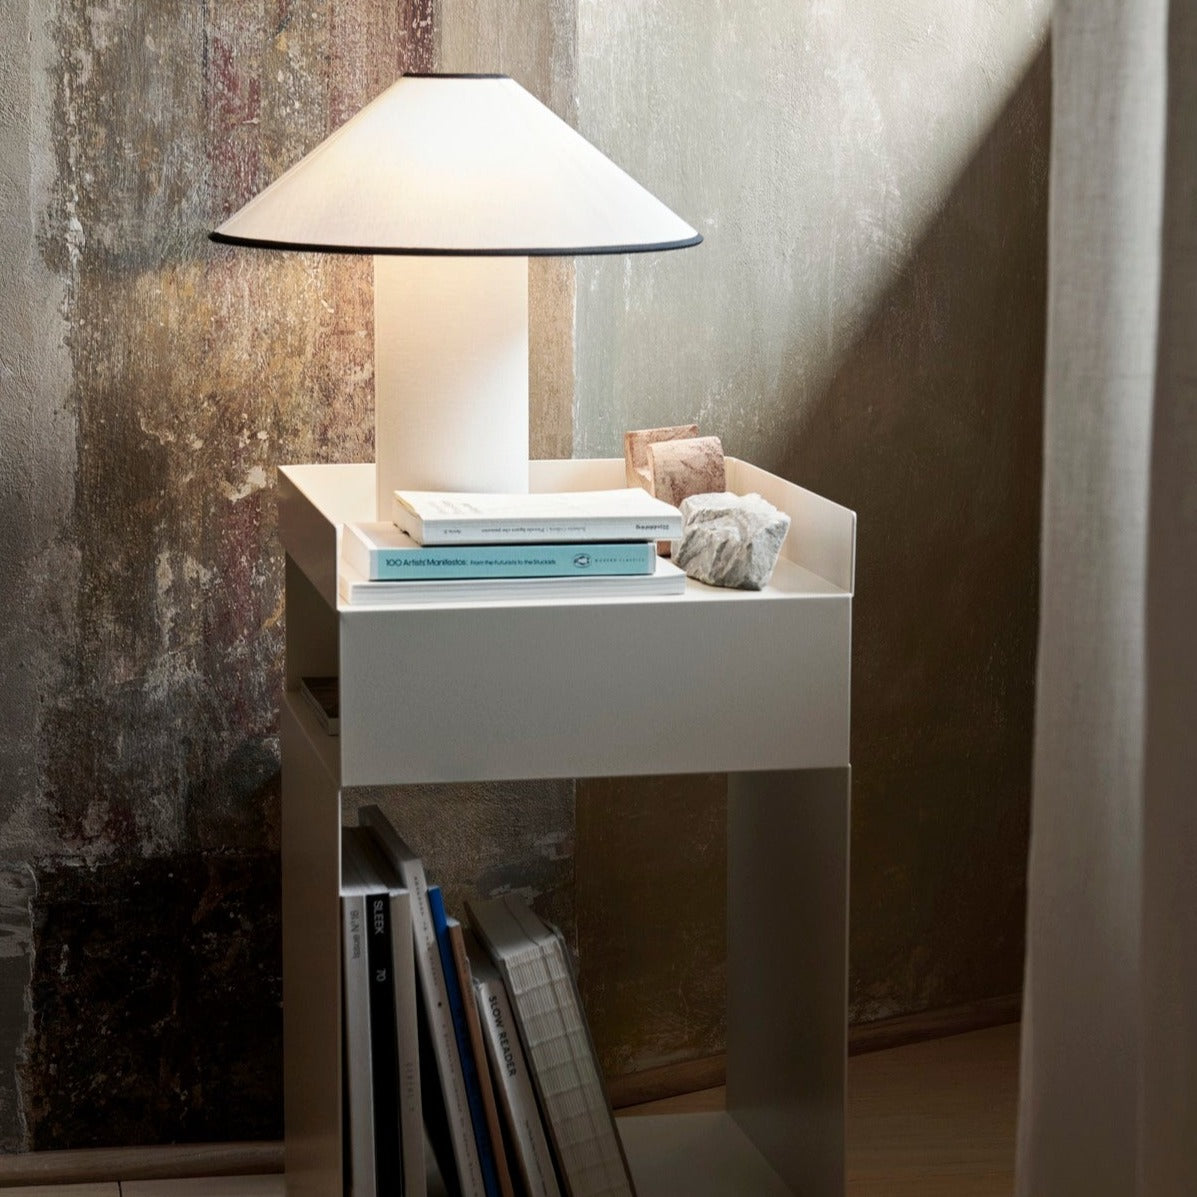 &Tradition Colette Table Lamp